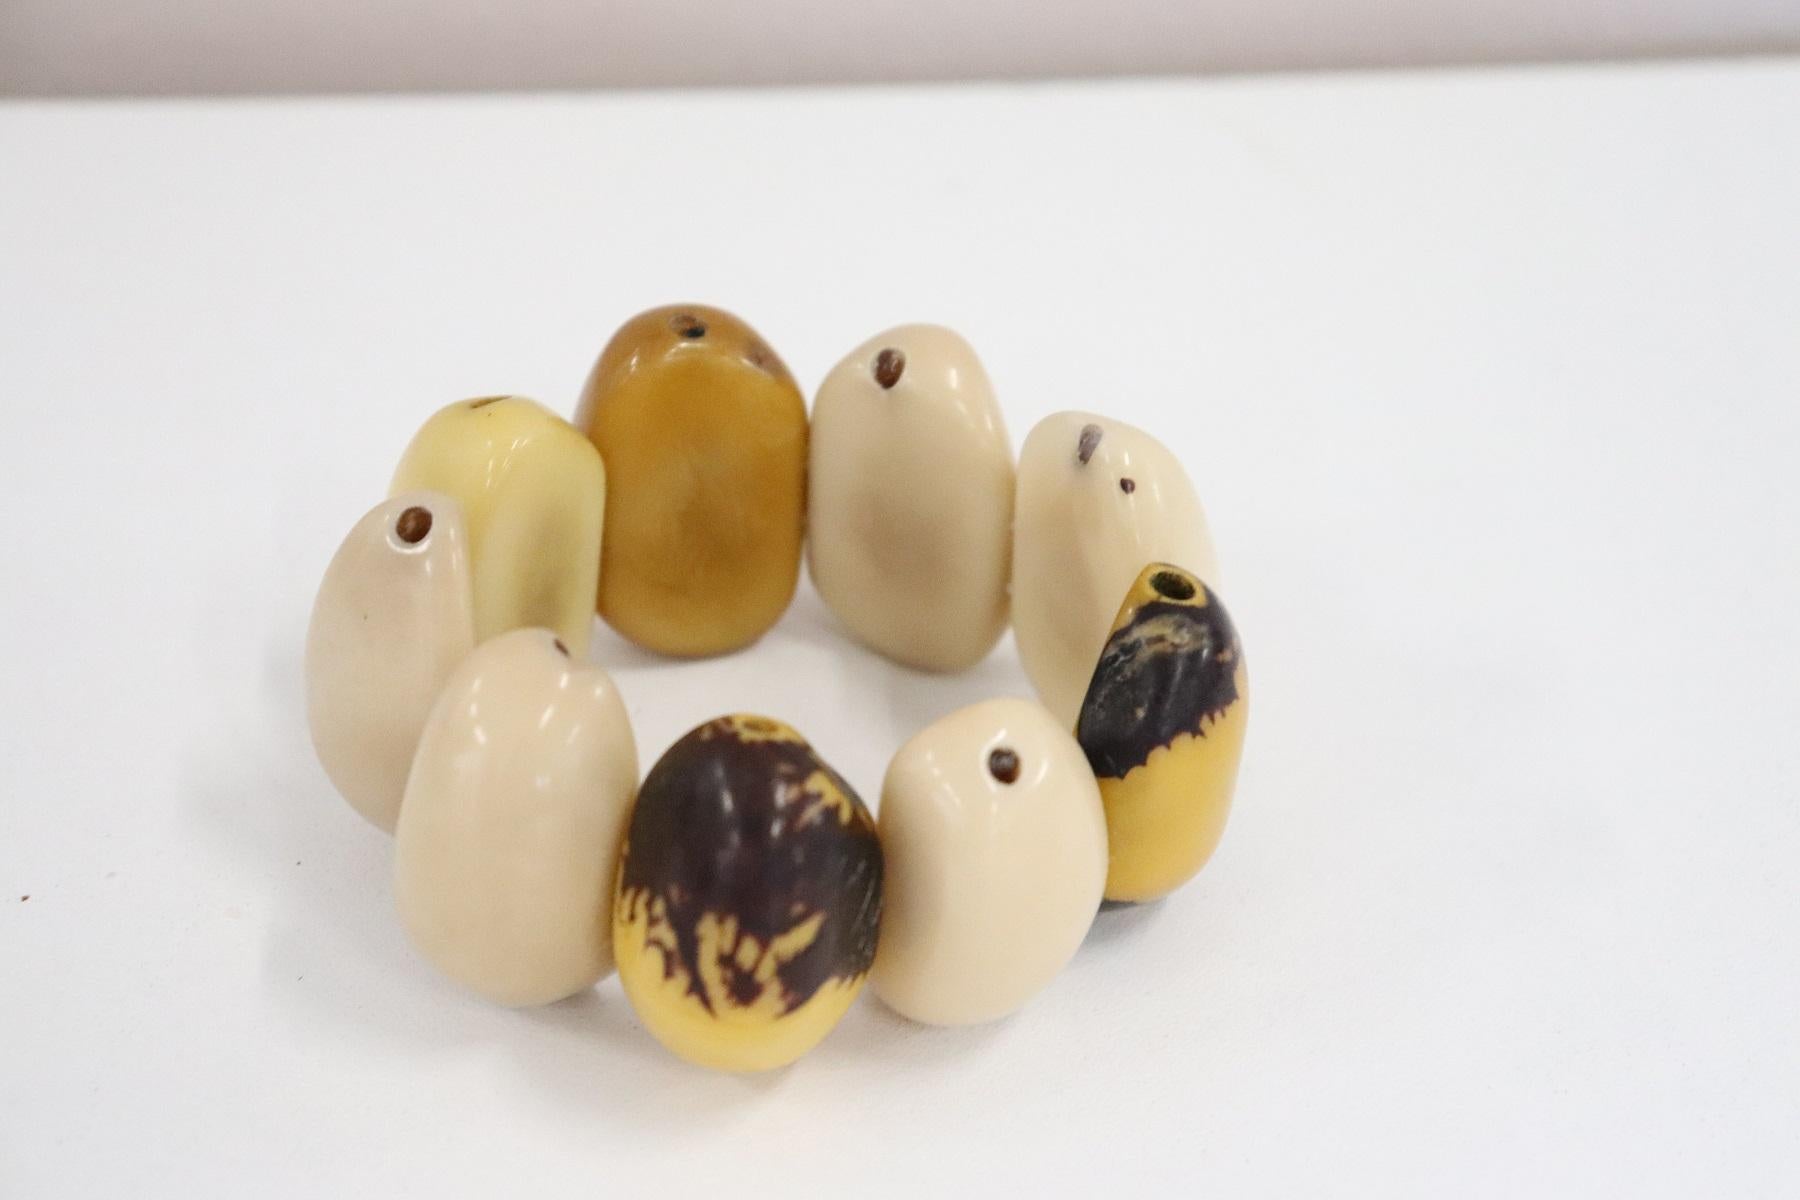 handmade bracelet made of vegetable ivory Tagua. Unique productions young and modern design. Bright colors perfect for a summer day. These jewels are born with total respect for nature. Vegetable ivory allows you to create unique precious jewels